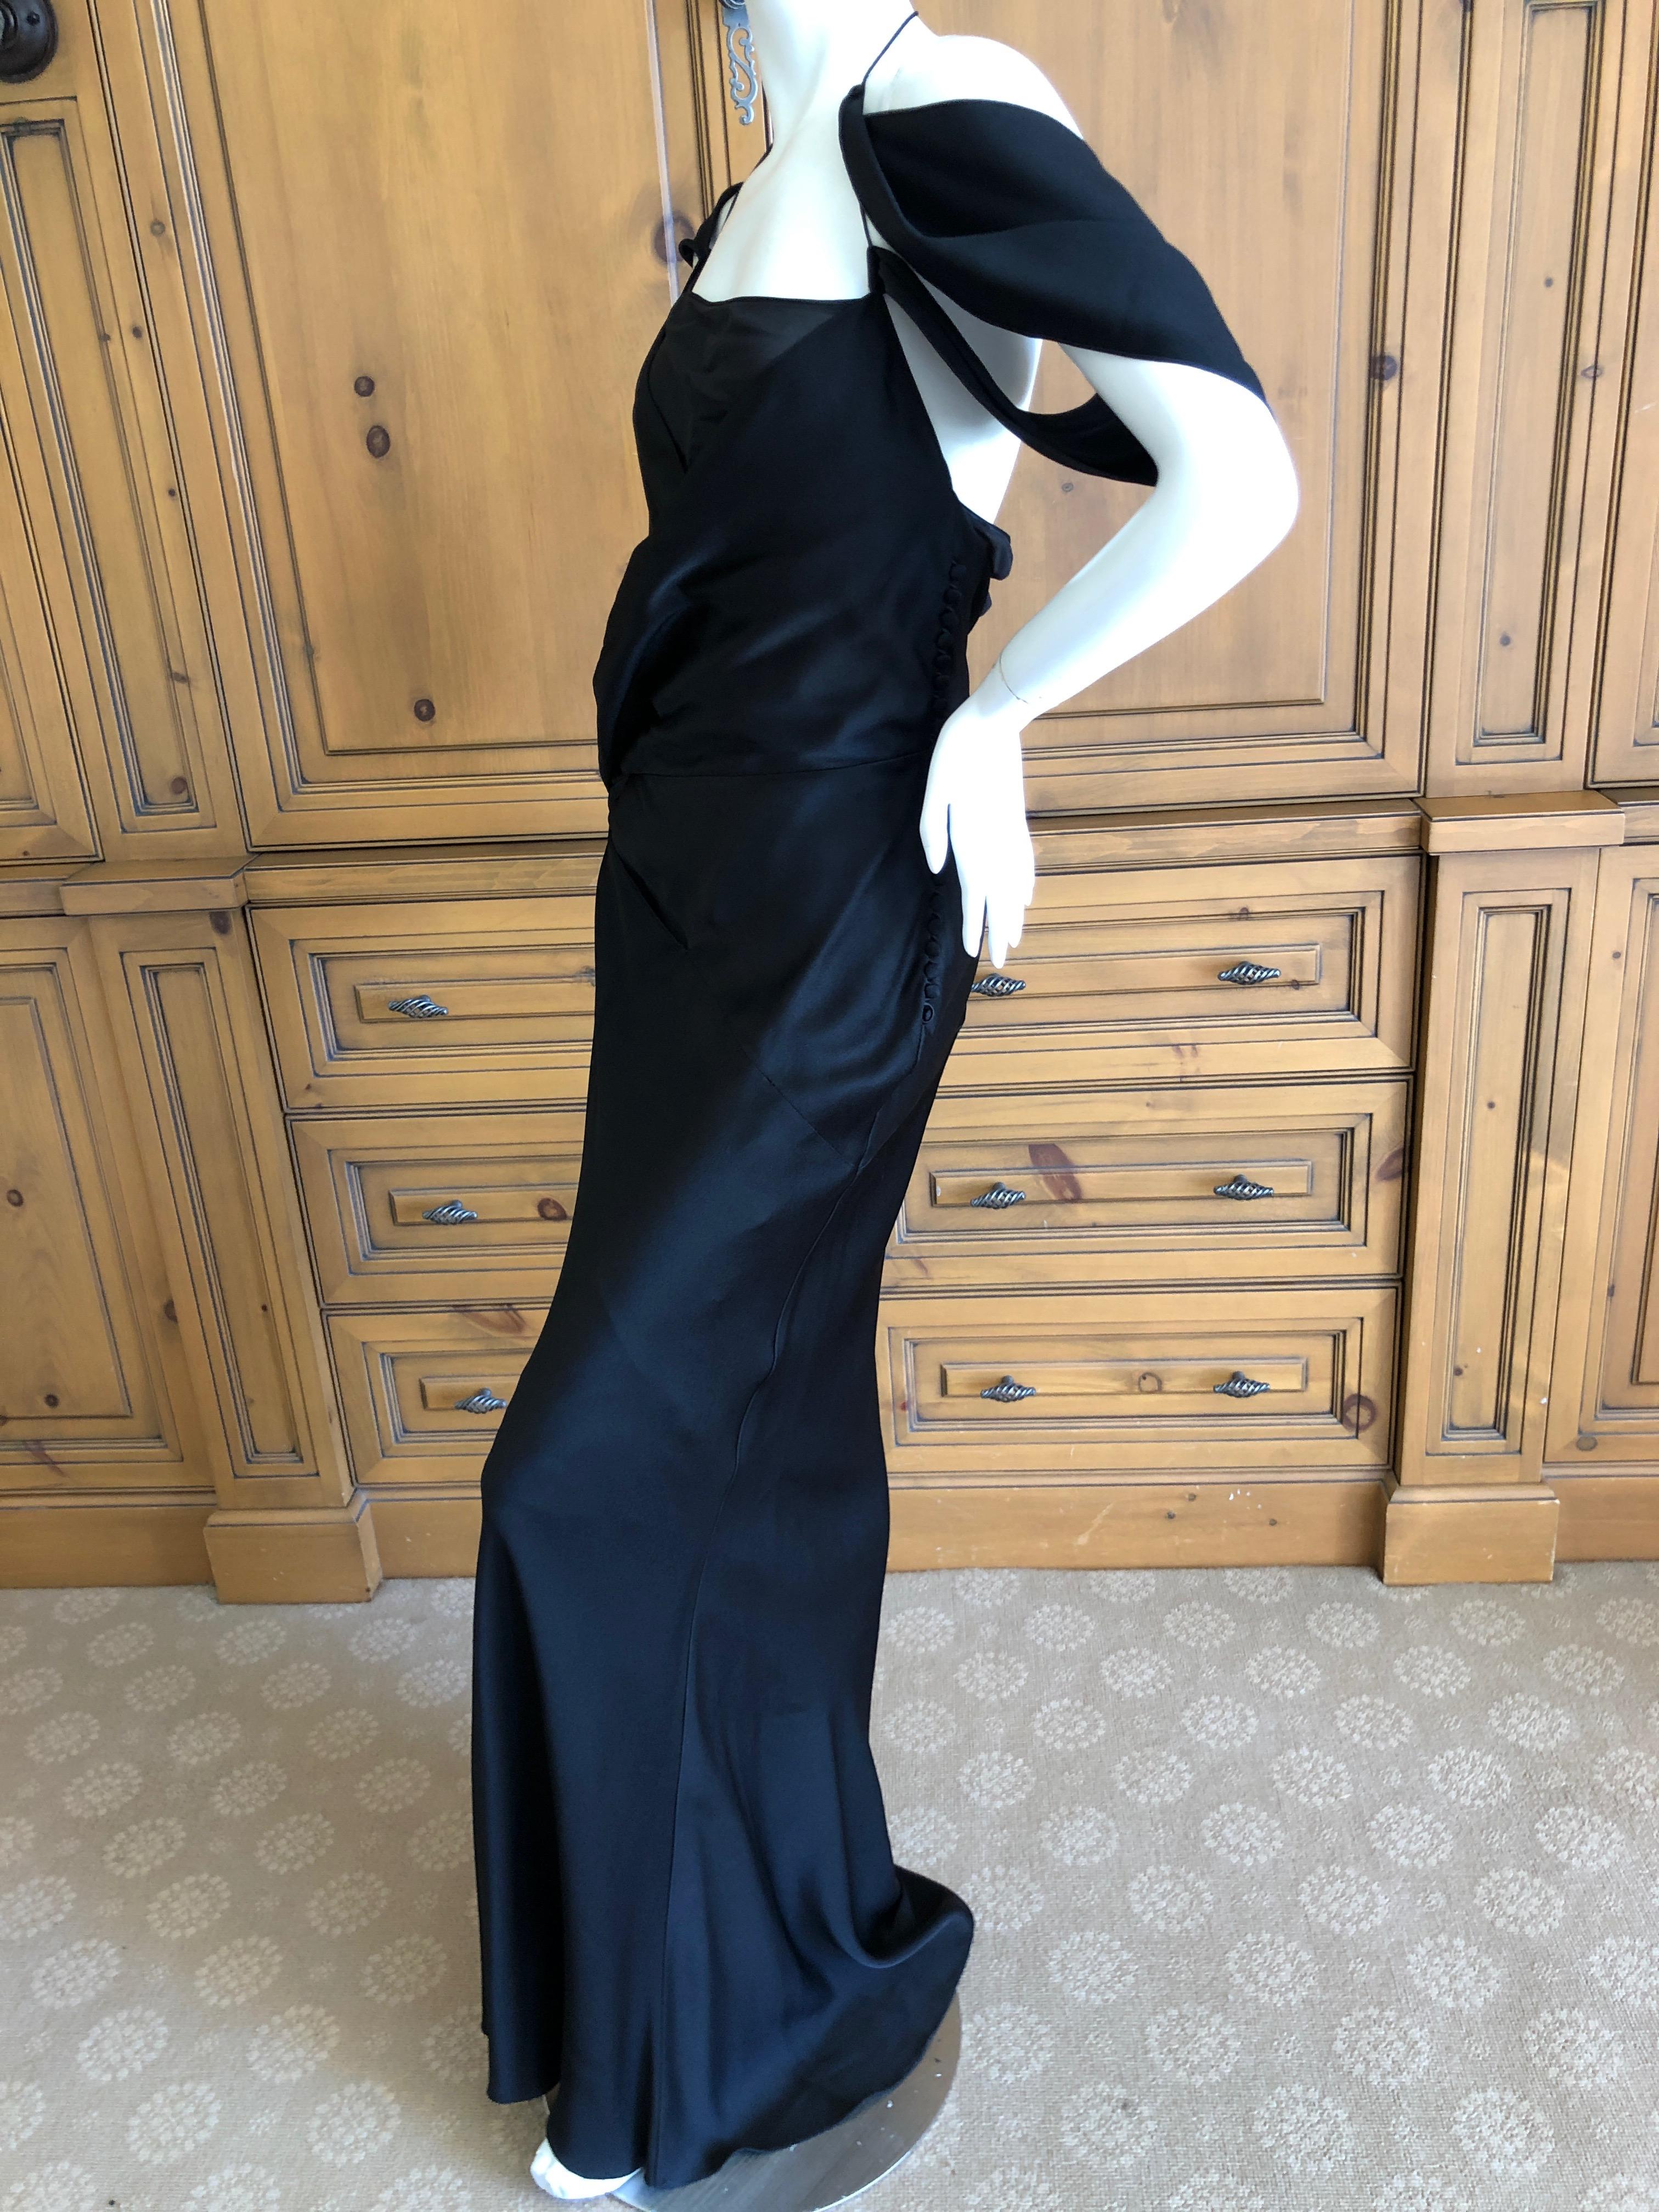 John Galliano Spring 2000 Black Bias Cut Evening Dress with Sheer Inserts Sz 42 For Sale 4